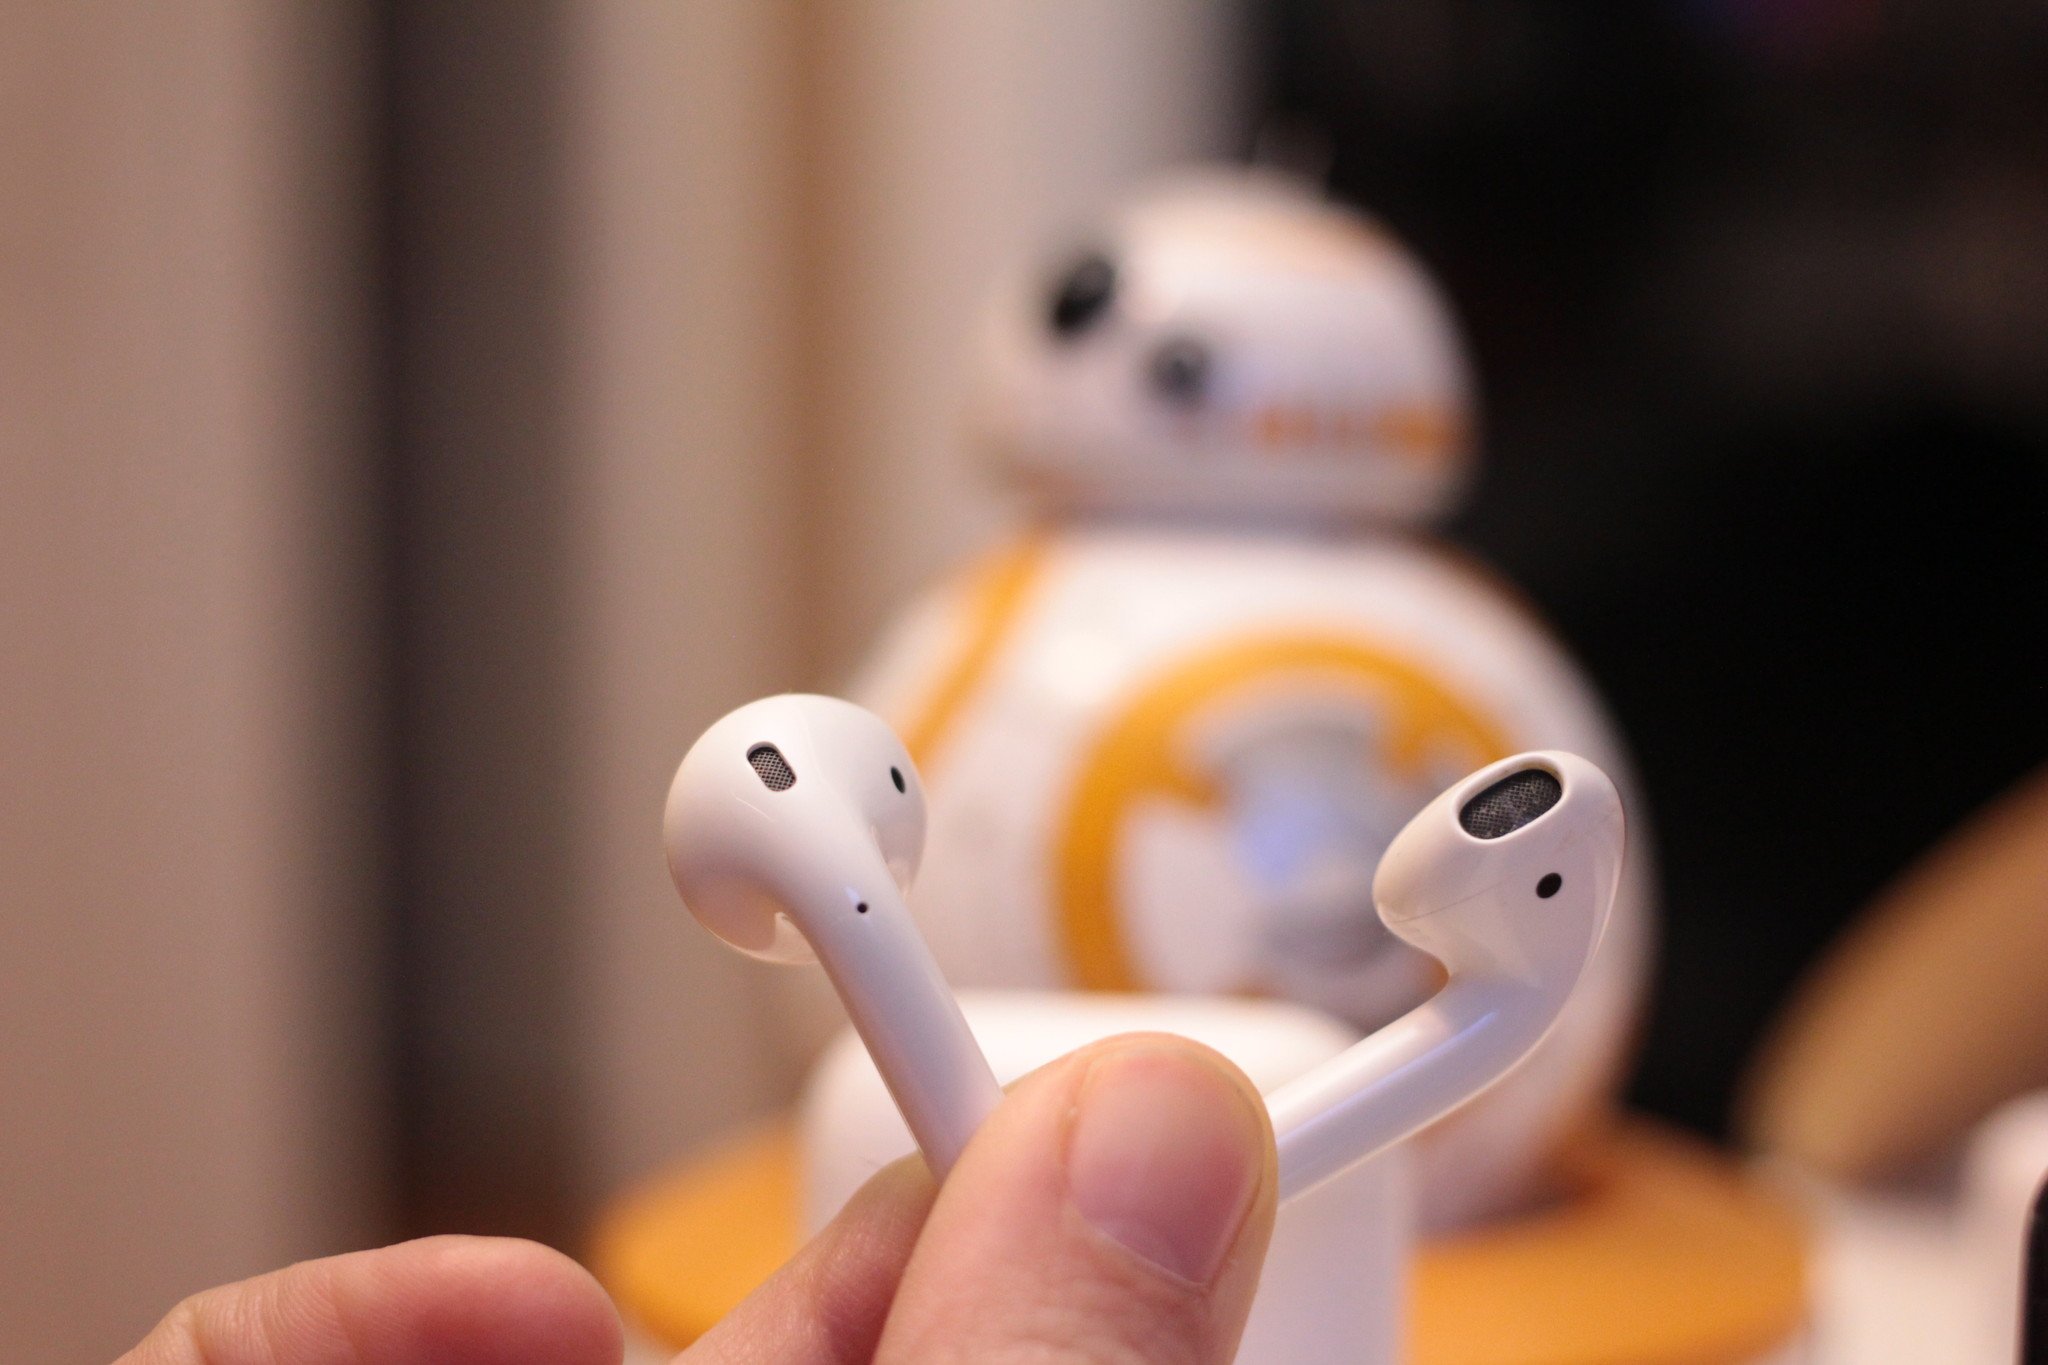 AirPods up close